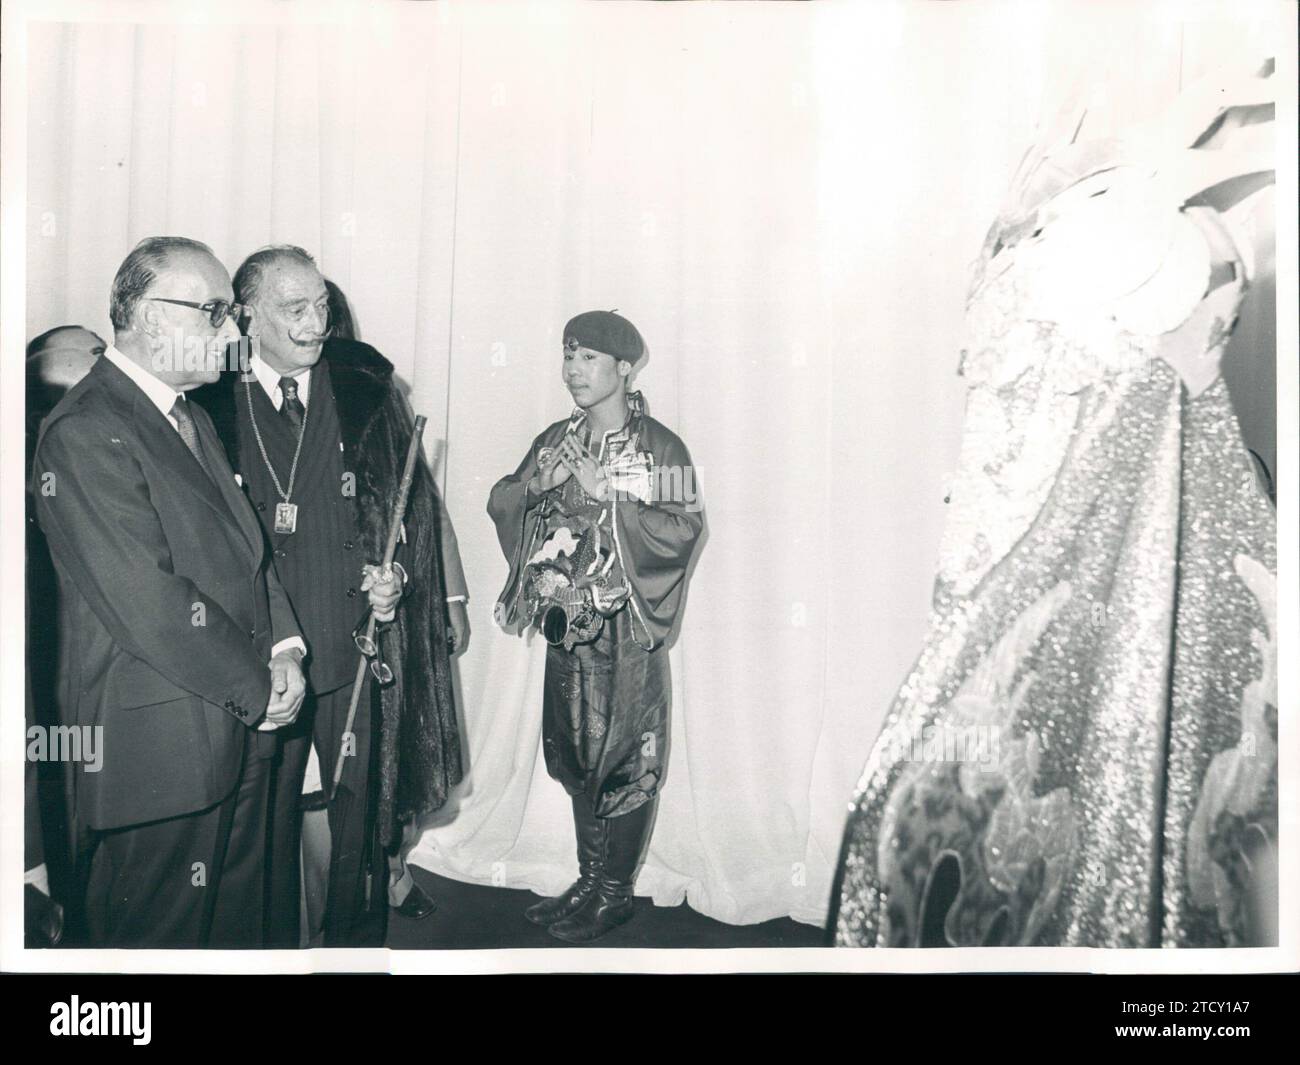 Figueras (Gerona), 9/29/1974. Inauguration of the Dalí Theater Museum. Credit: Album / Archivo ABC / Juan Cid Stock Photo